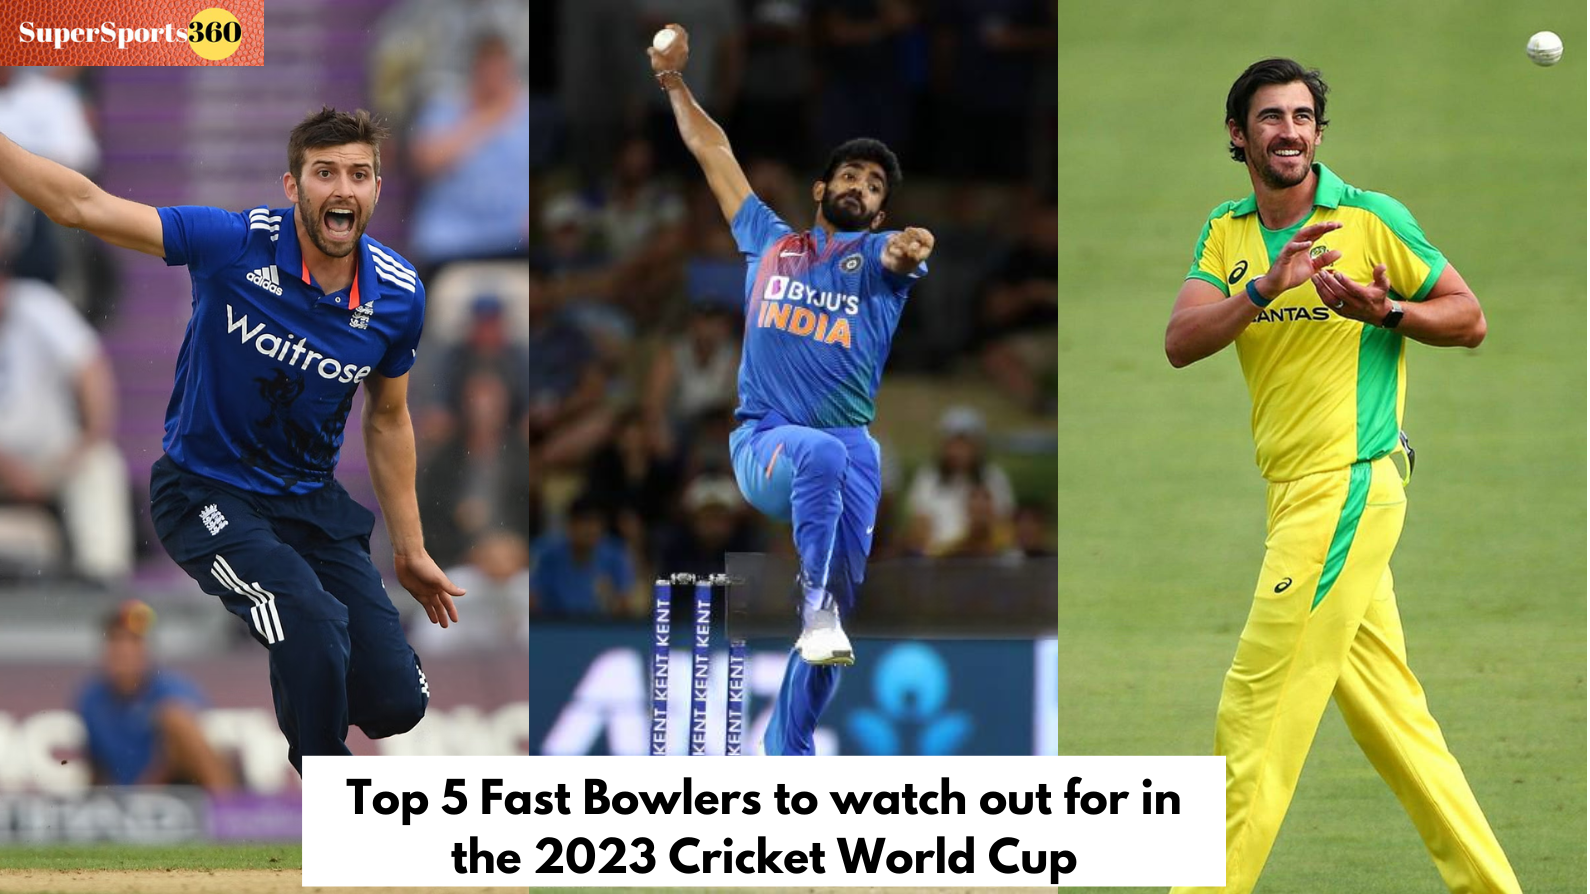 Top 5 Fast Bowlers to watch out for in the 2023 Cricket World Cup